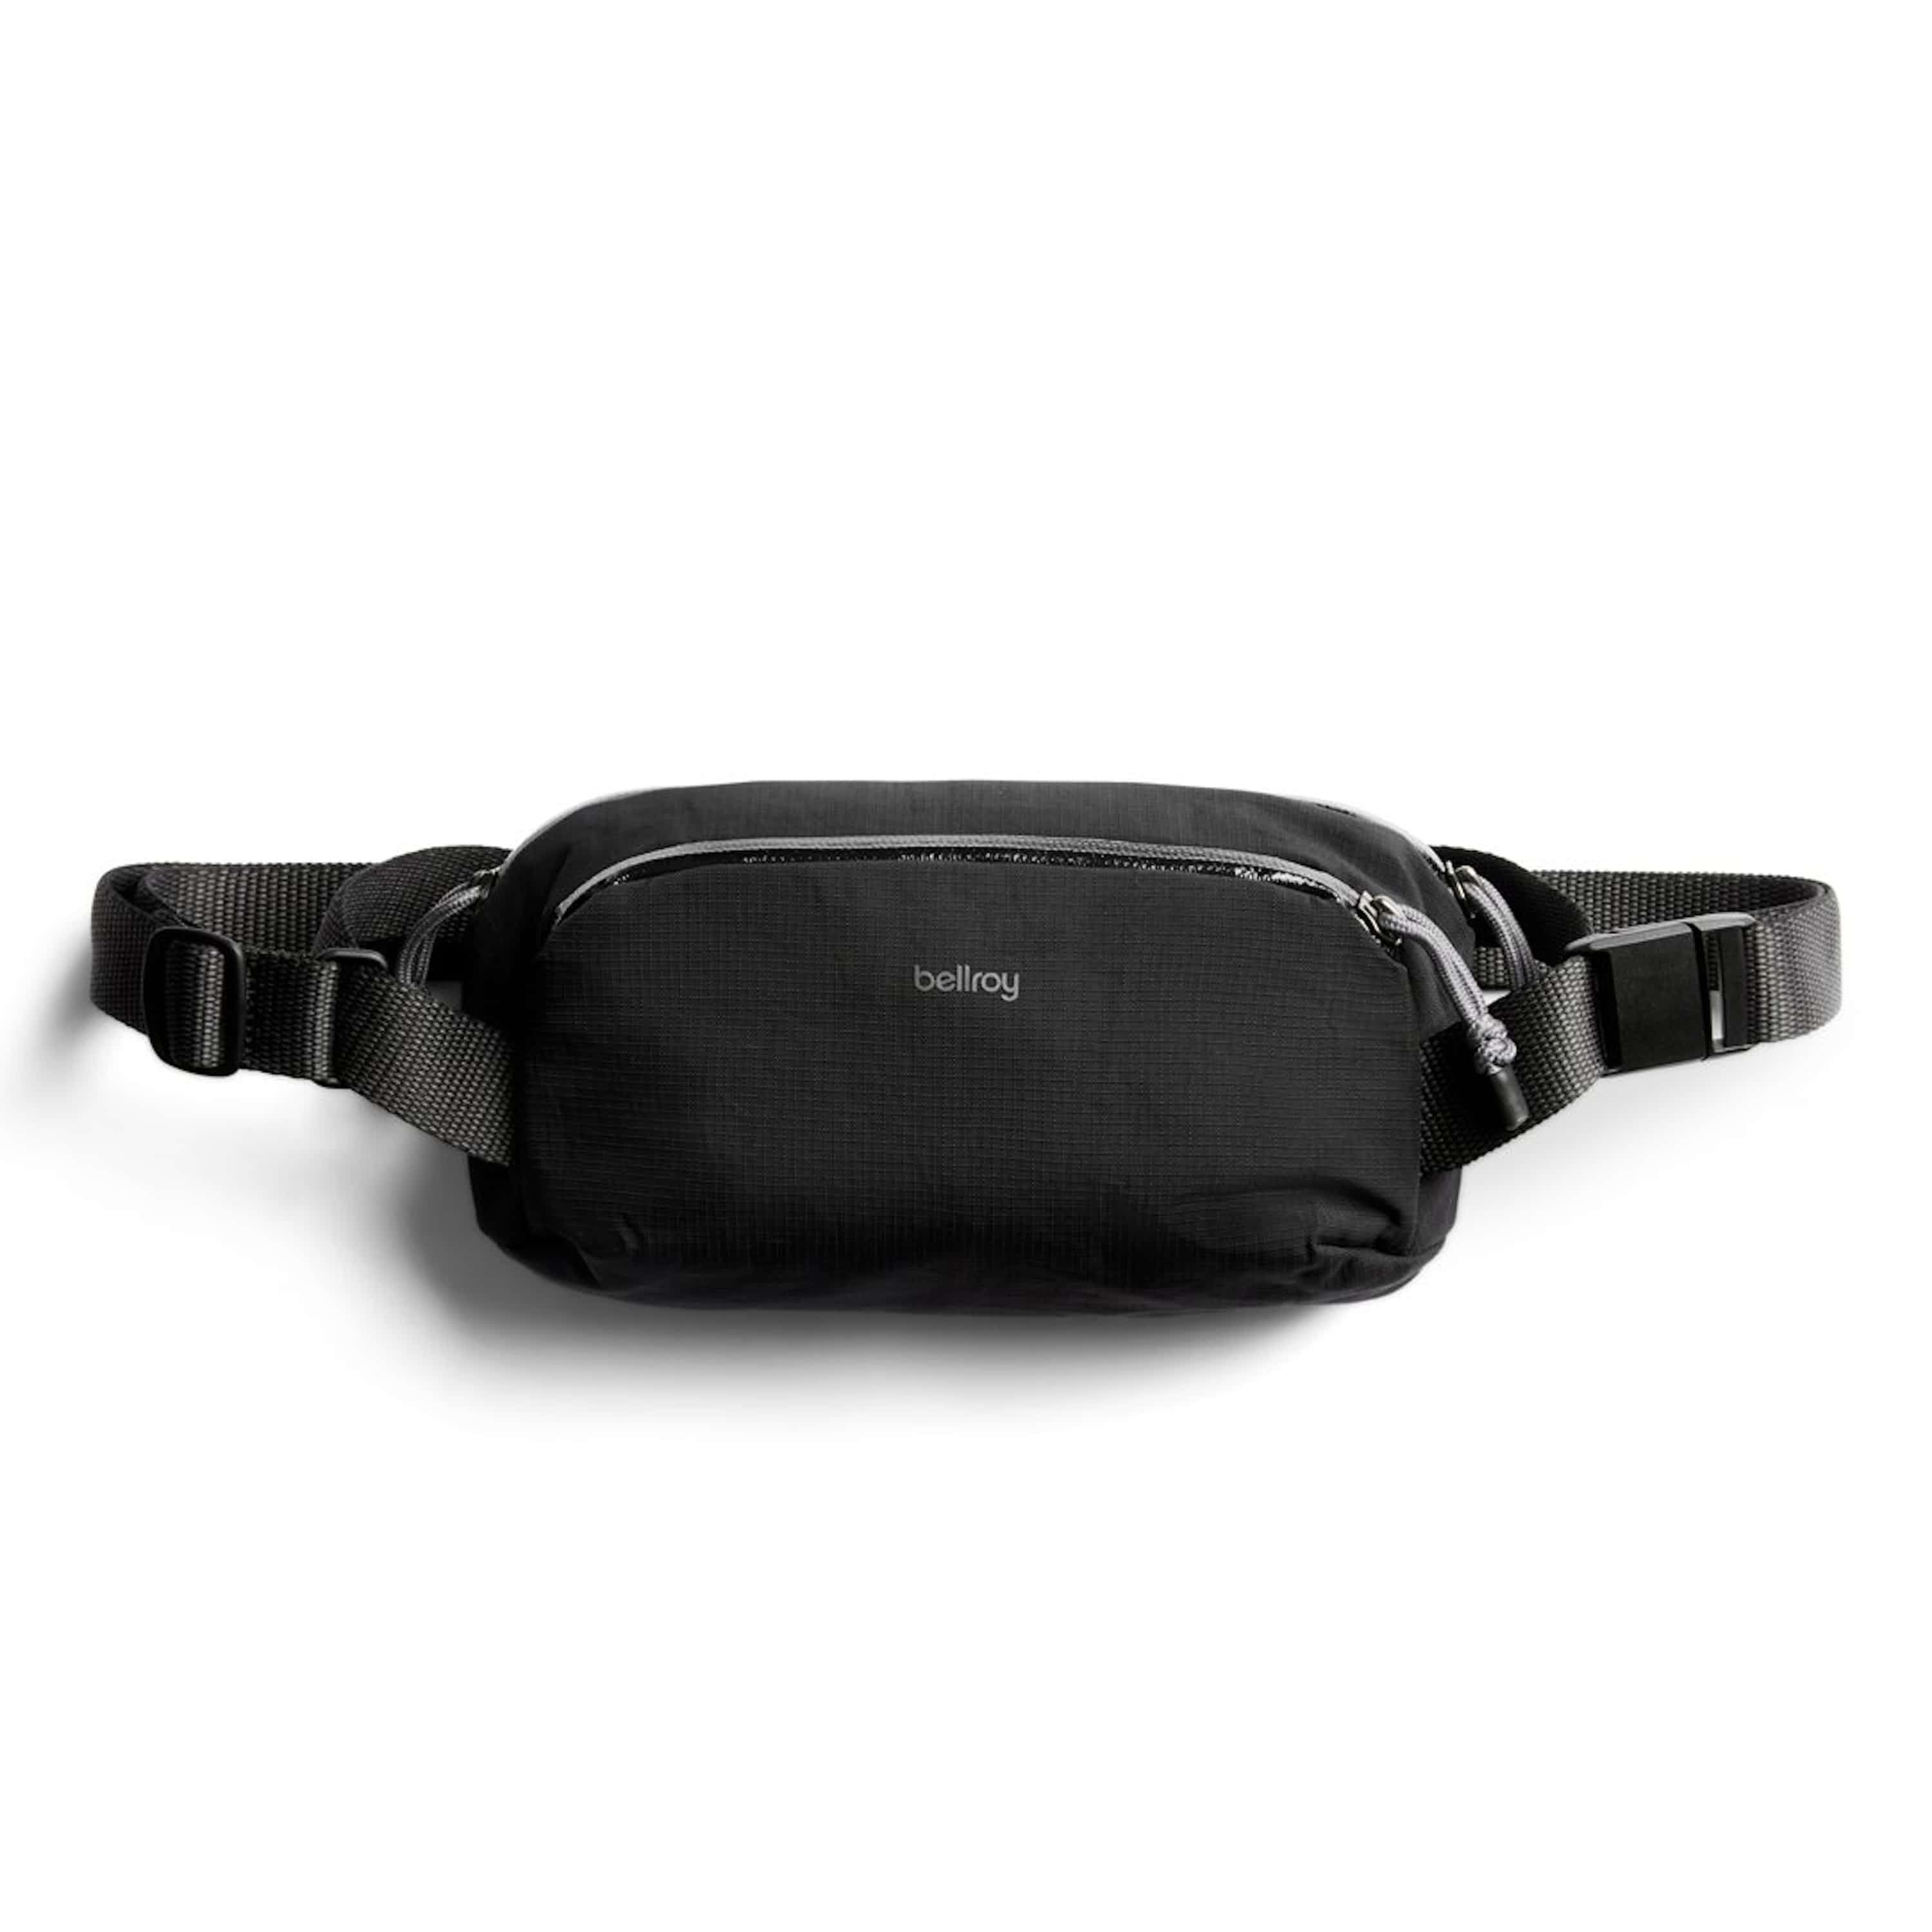 These Fanny Packs Let You Carry Your Necessities in Style